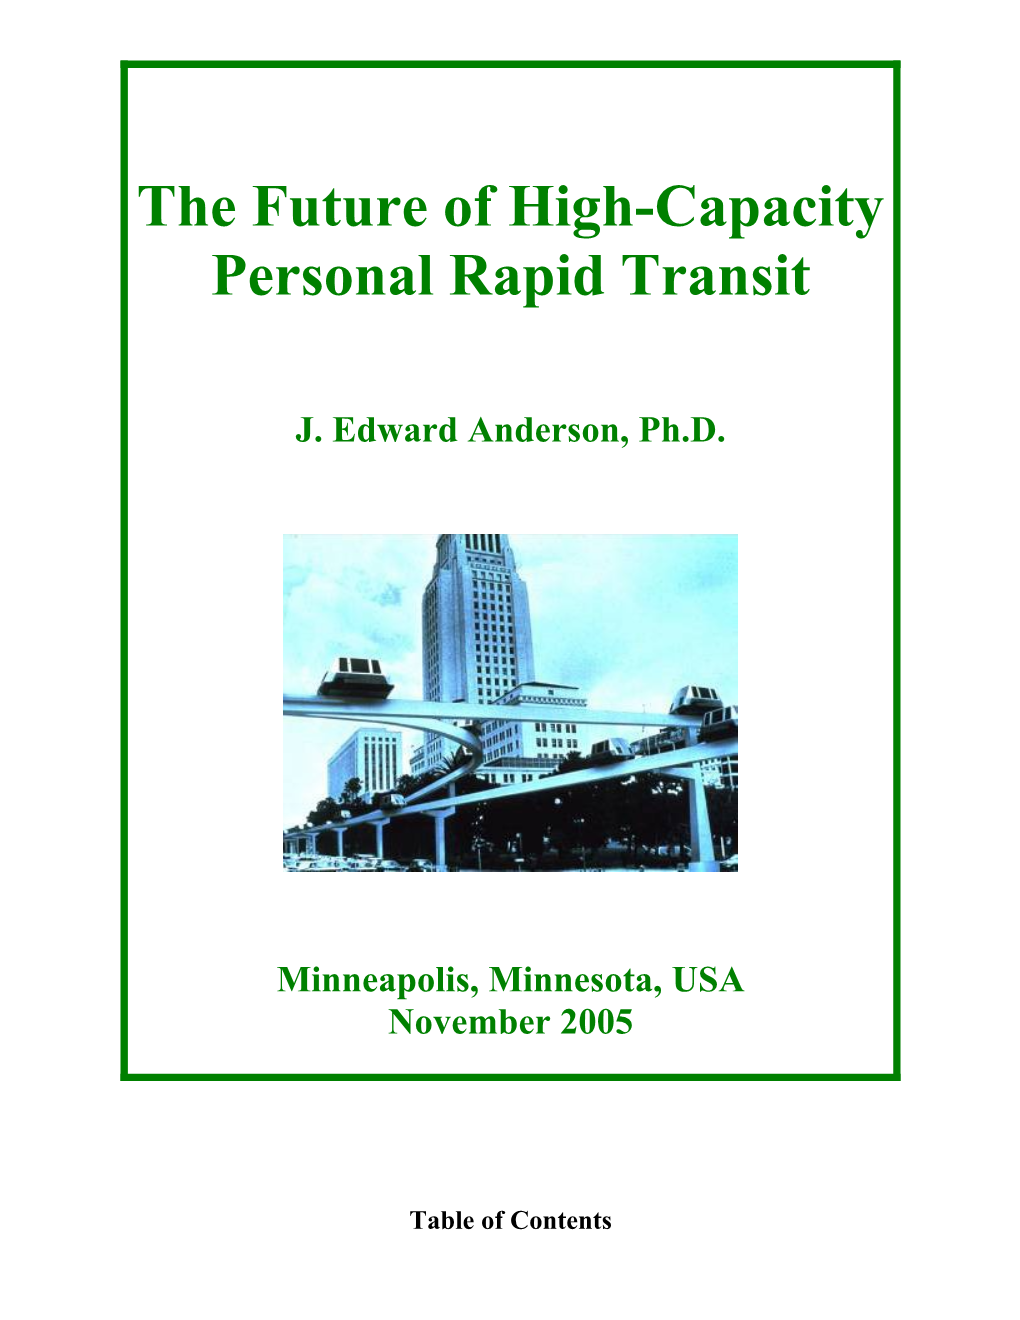 The Future of High-Capacity Personal Rapid Transit